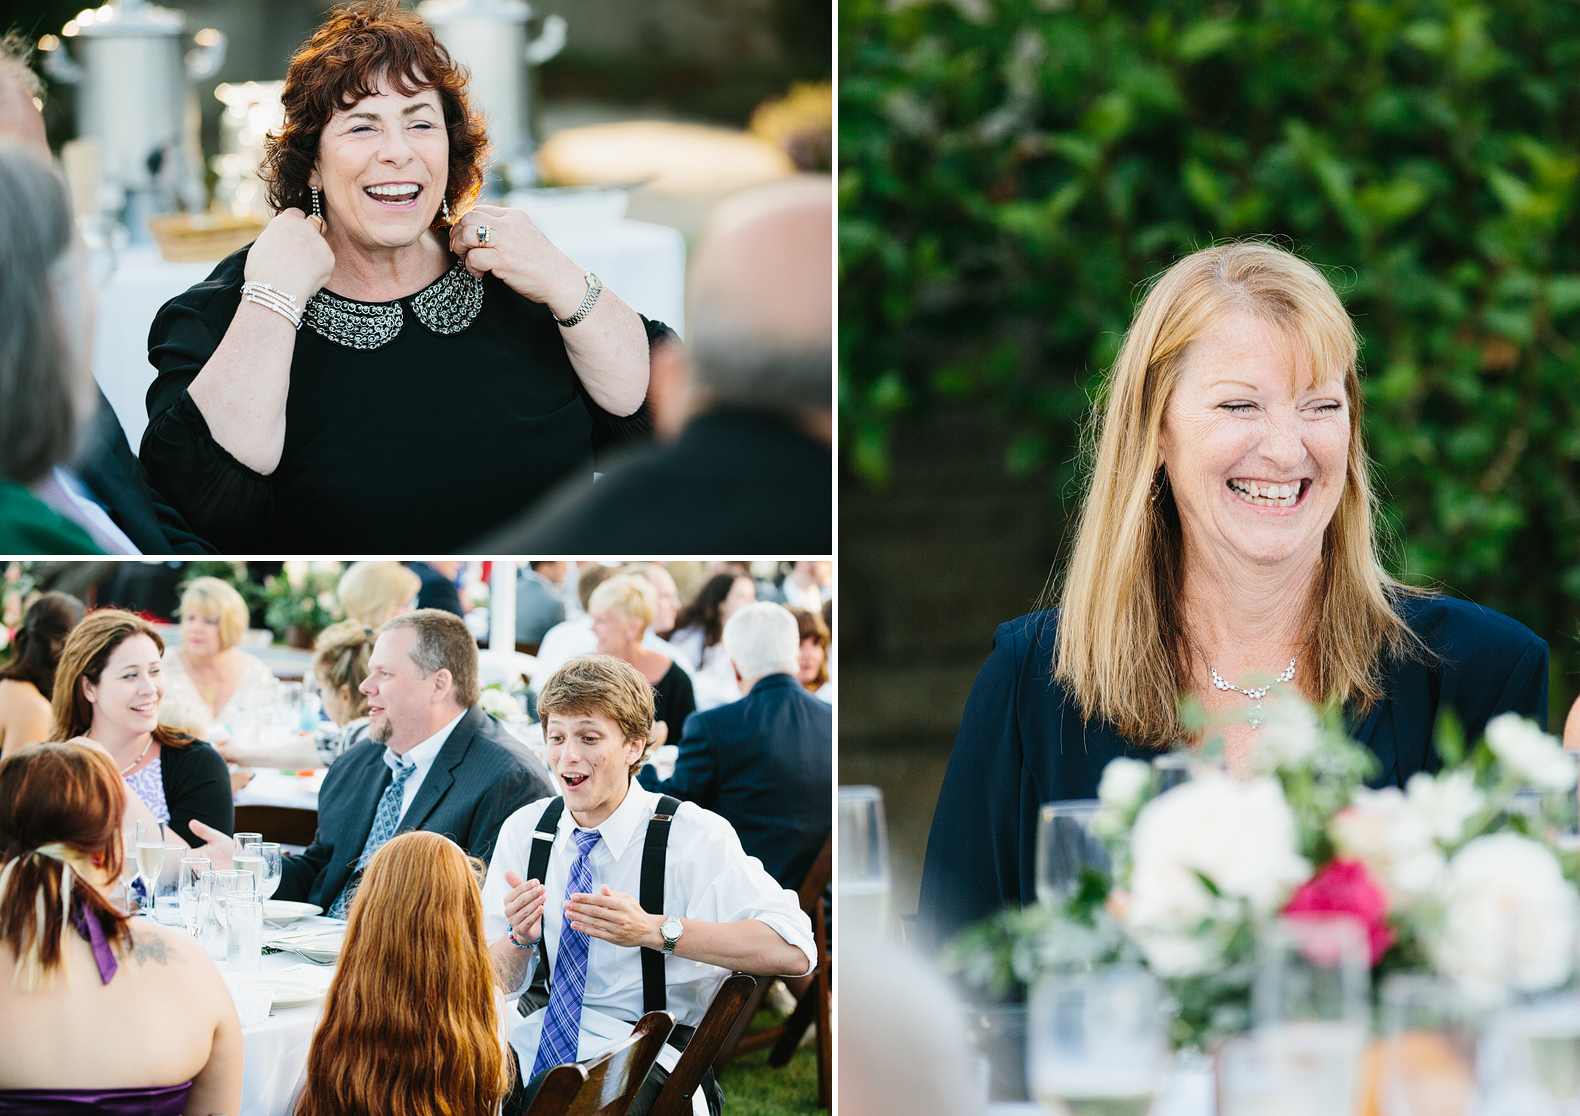 These are some of Alix and Matt's happy guests at their reception.